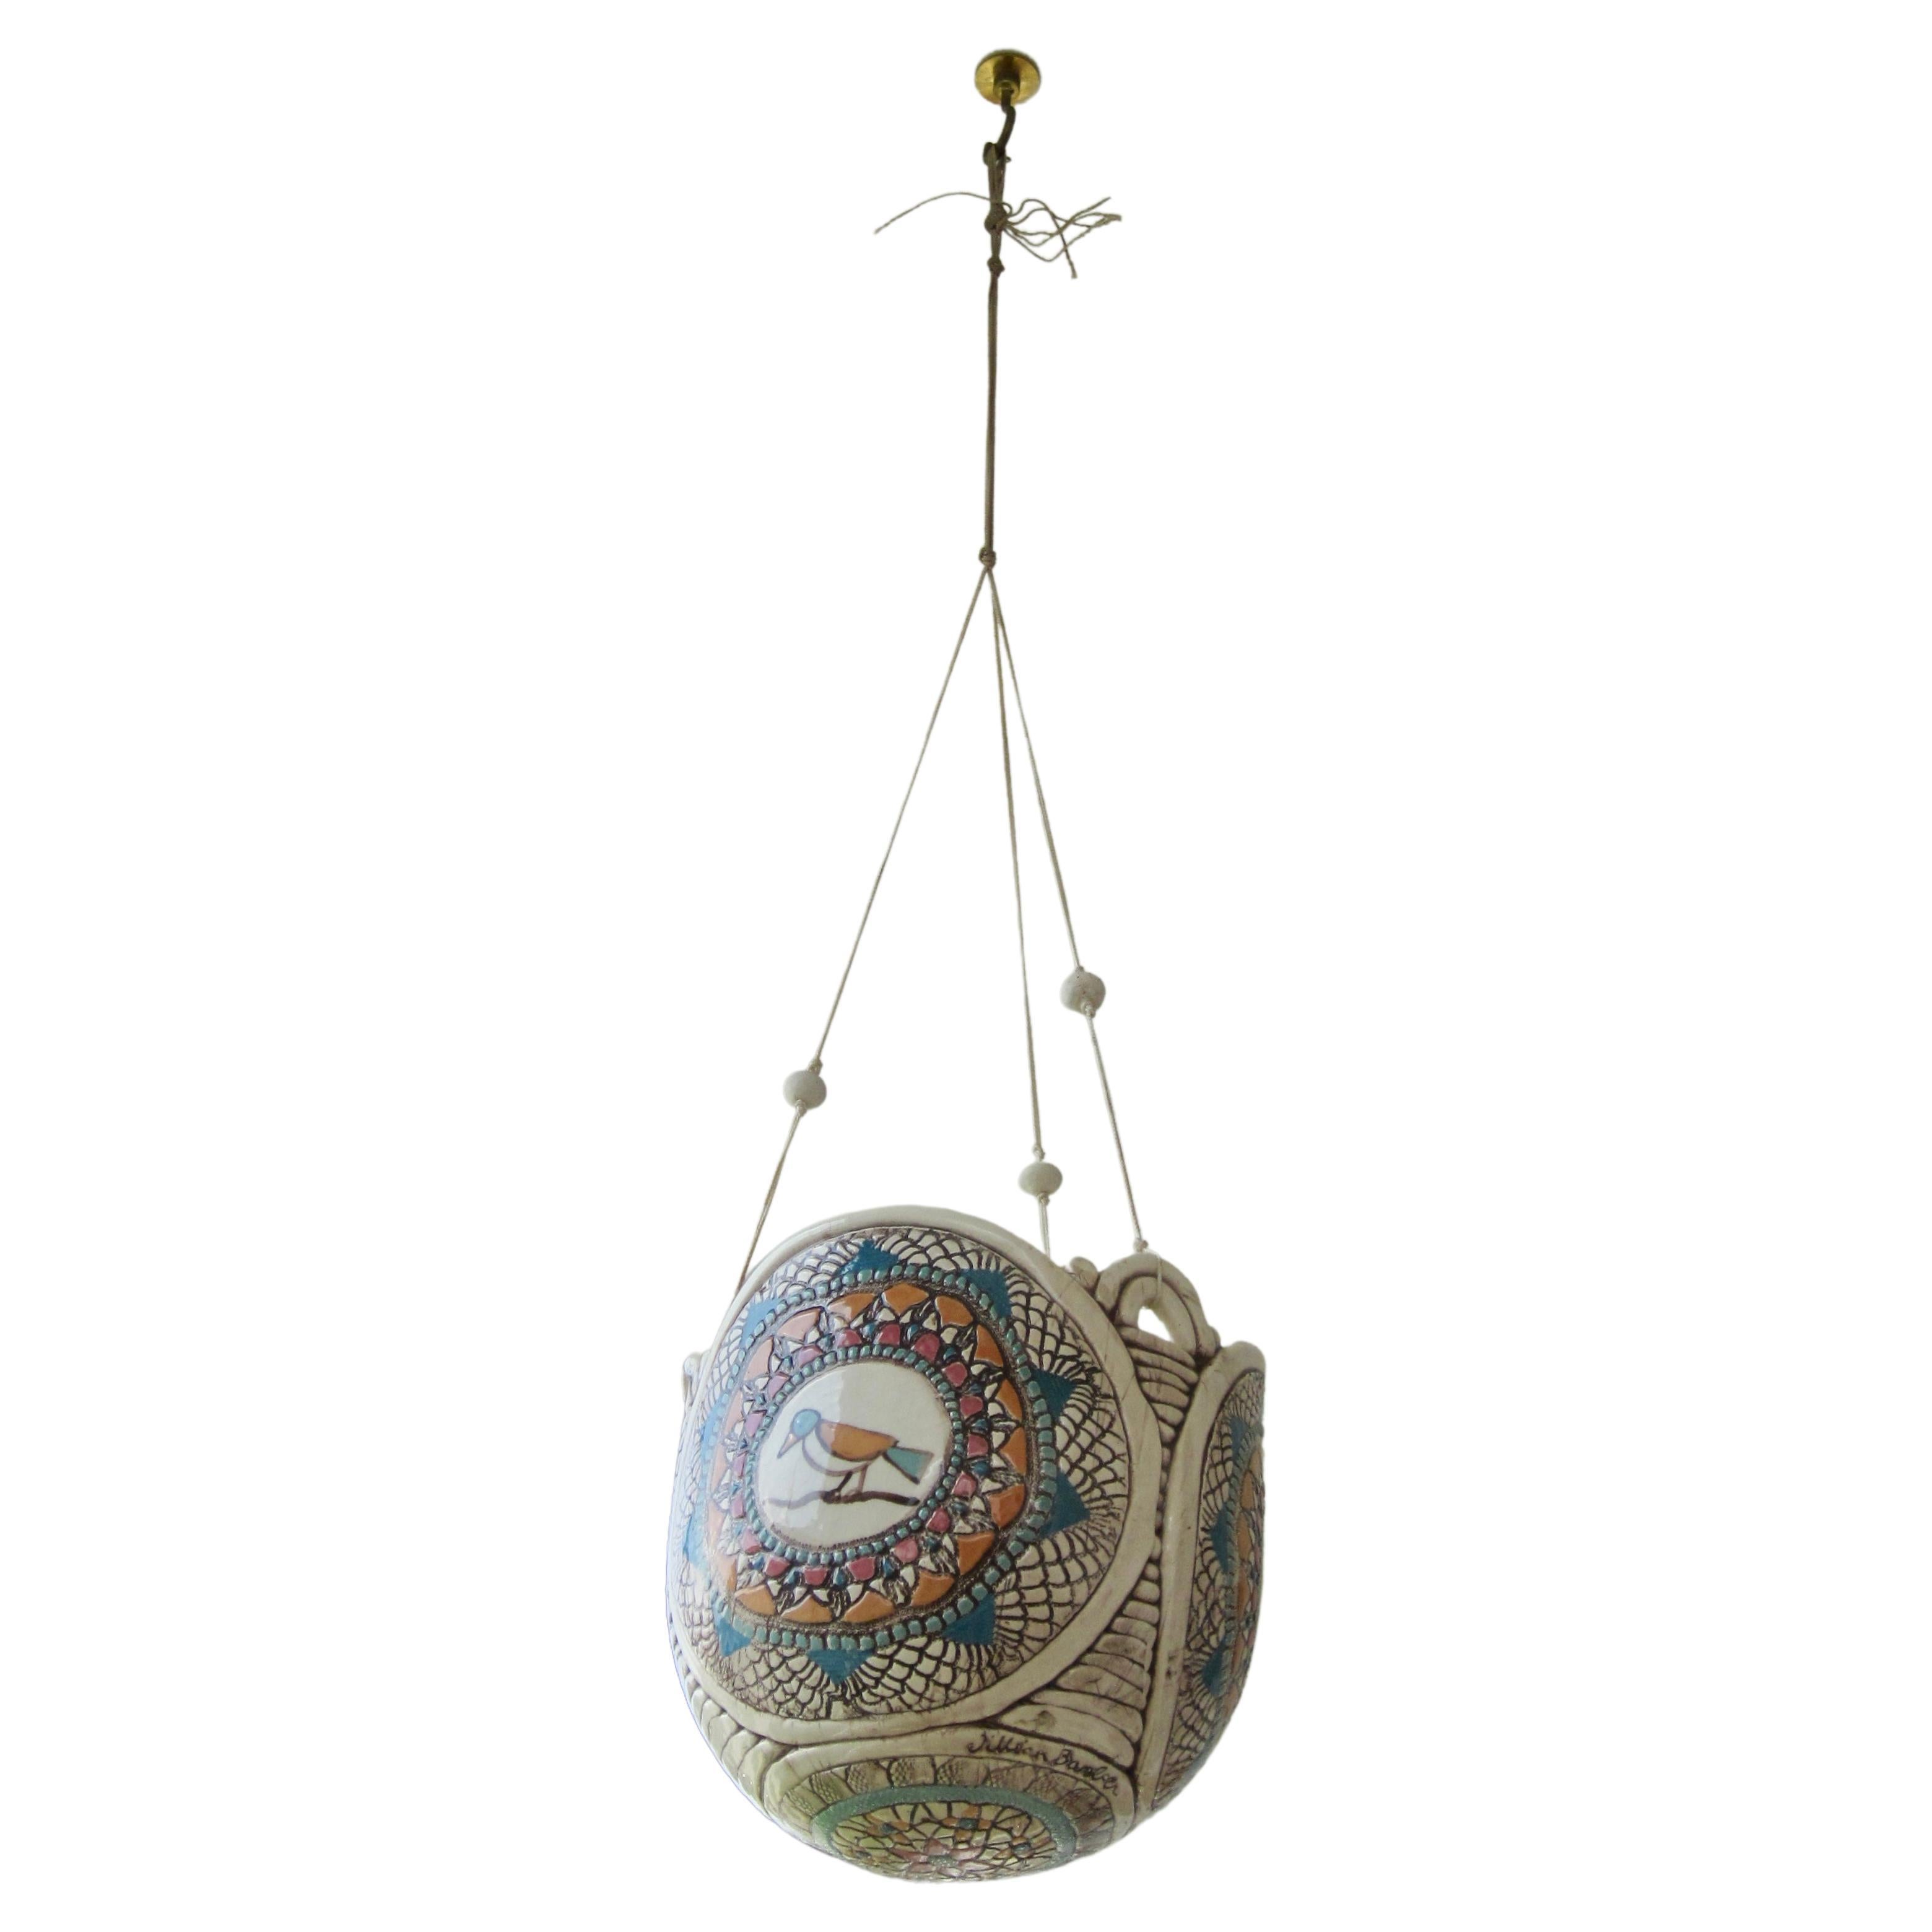 A textural three sided planter pot featuring a bird on each side and floral design on underside. The sculpture will not rest flat on a surface as it is meant to be hung. The nylon threading used for hanging is adorned with three clay beads. Signed